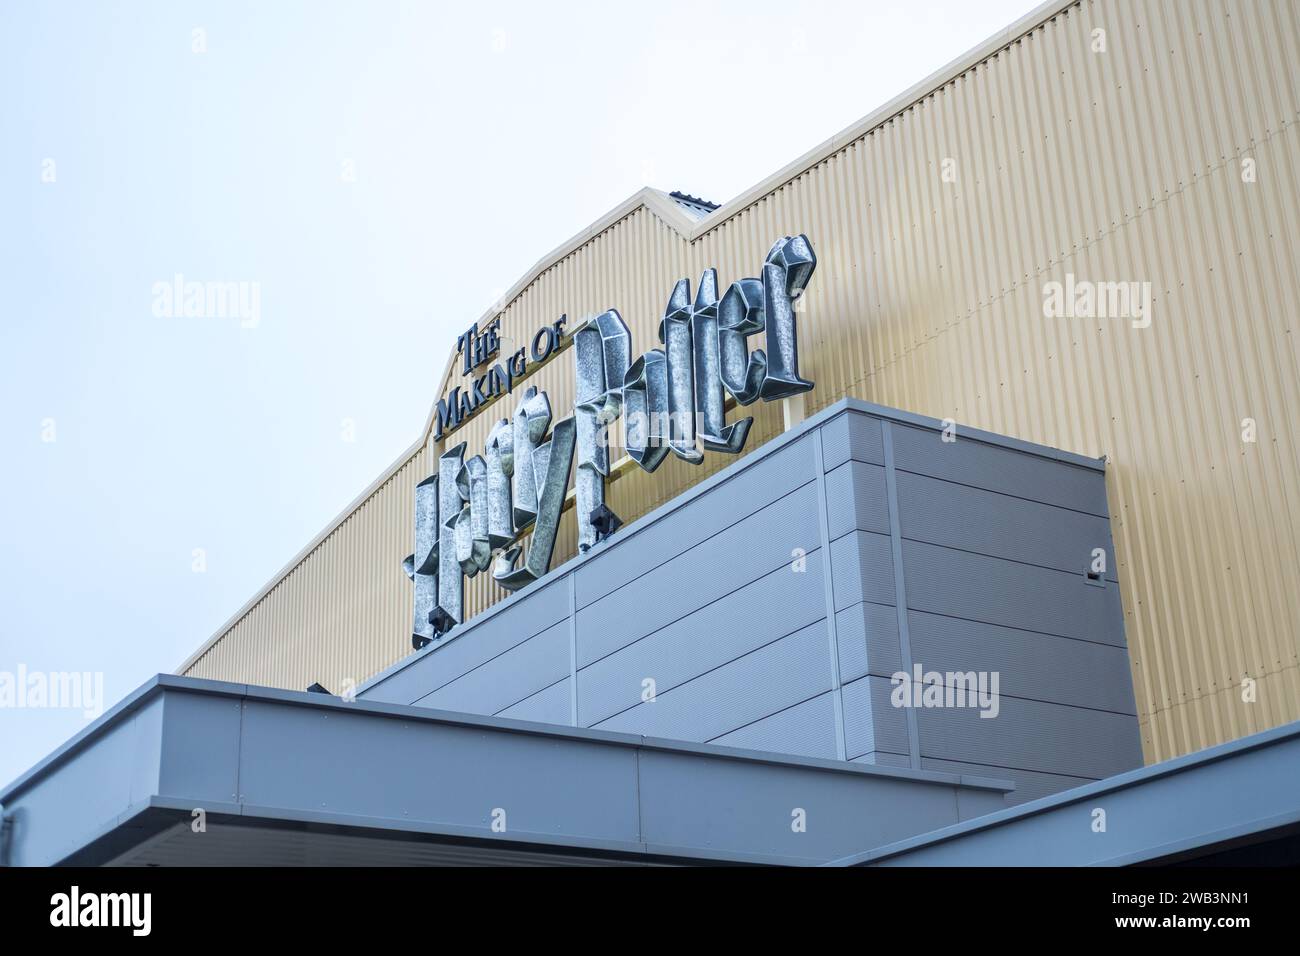 London, England - 18 November 2017: A sign in front of the Warner Brothers Studio tour, The making of Harry Potter at Leavesden Studio in London. Stock Photo